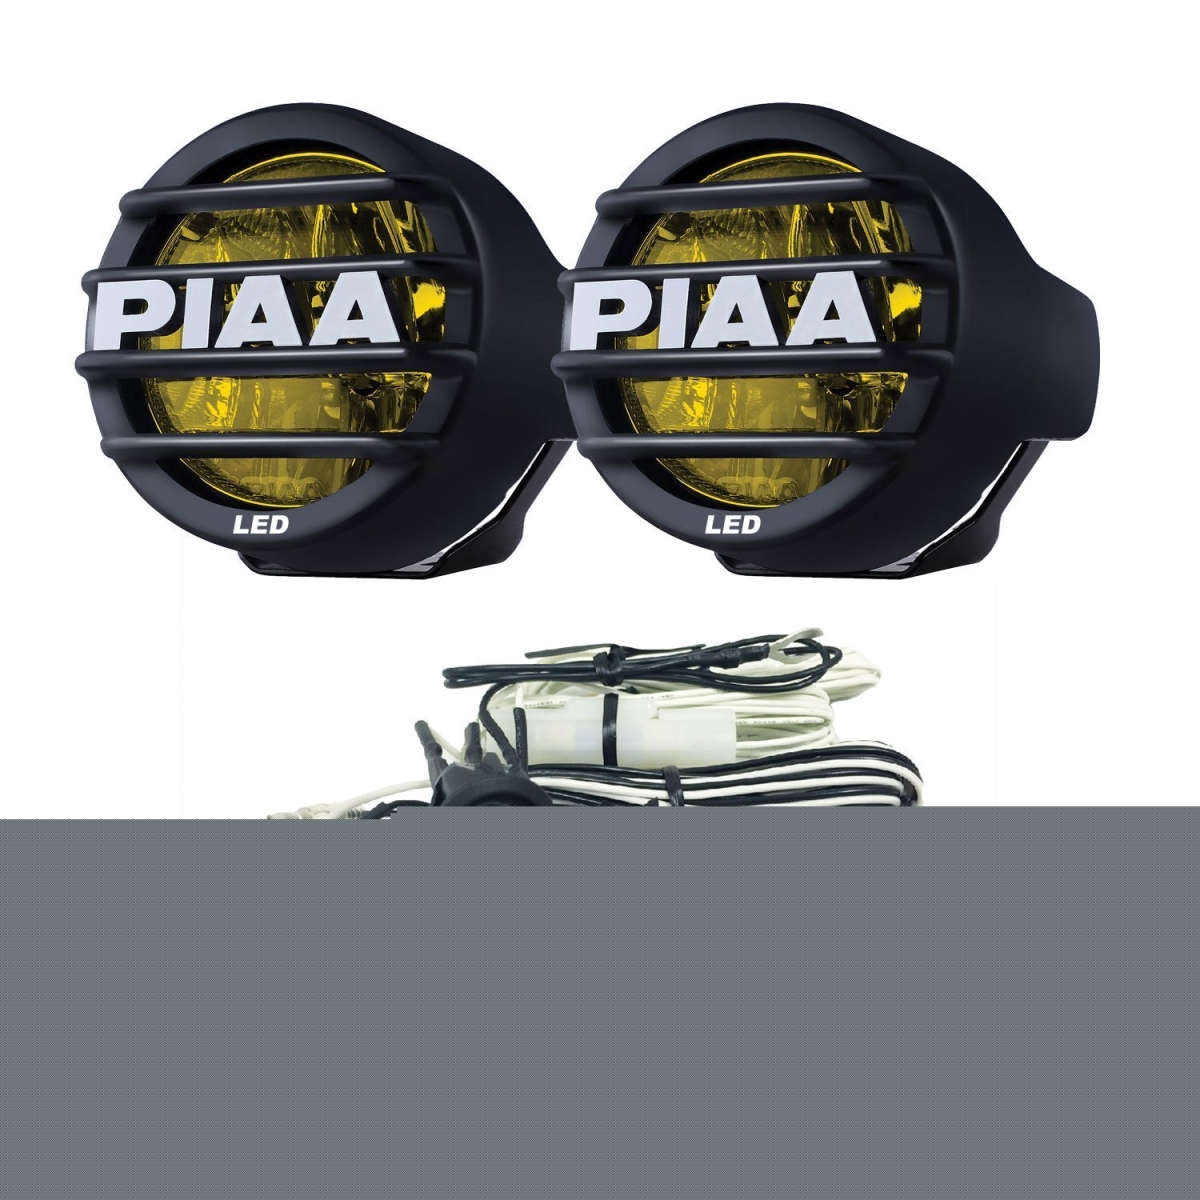 Picture of Piaa P27-2205372 3.5 ft. LP530 LED Ion Driving Light Kit - Yellow